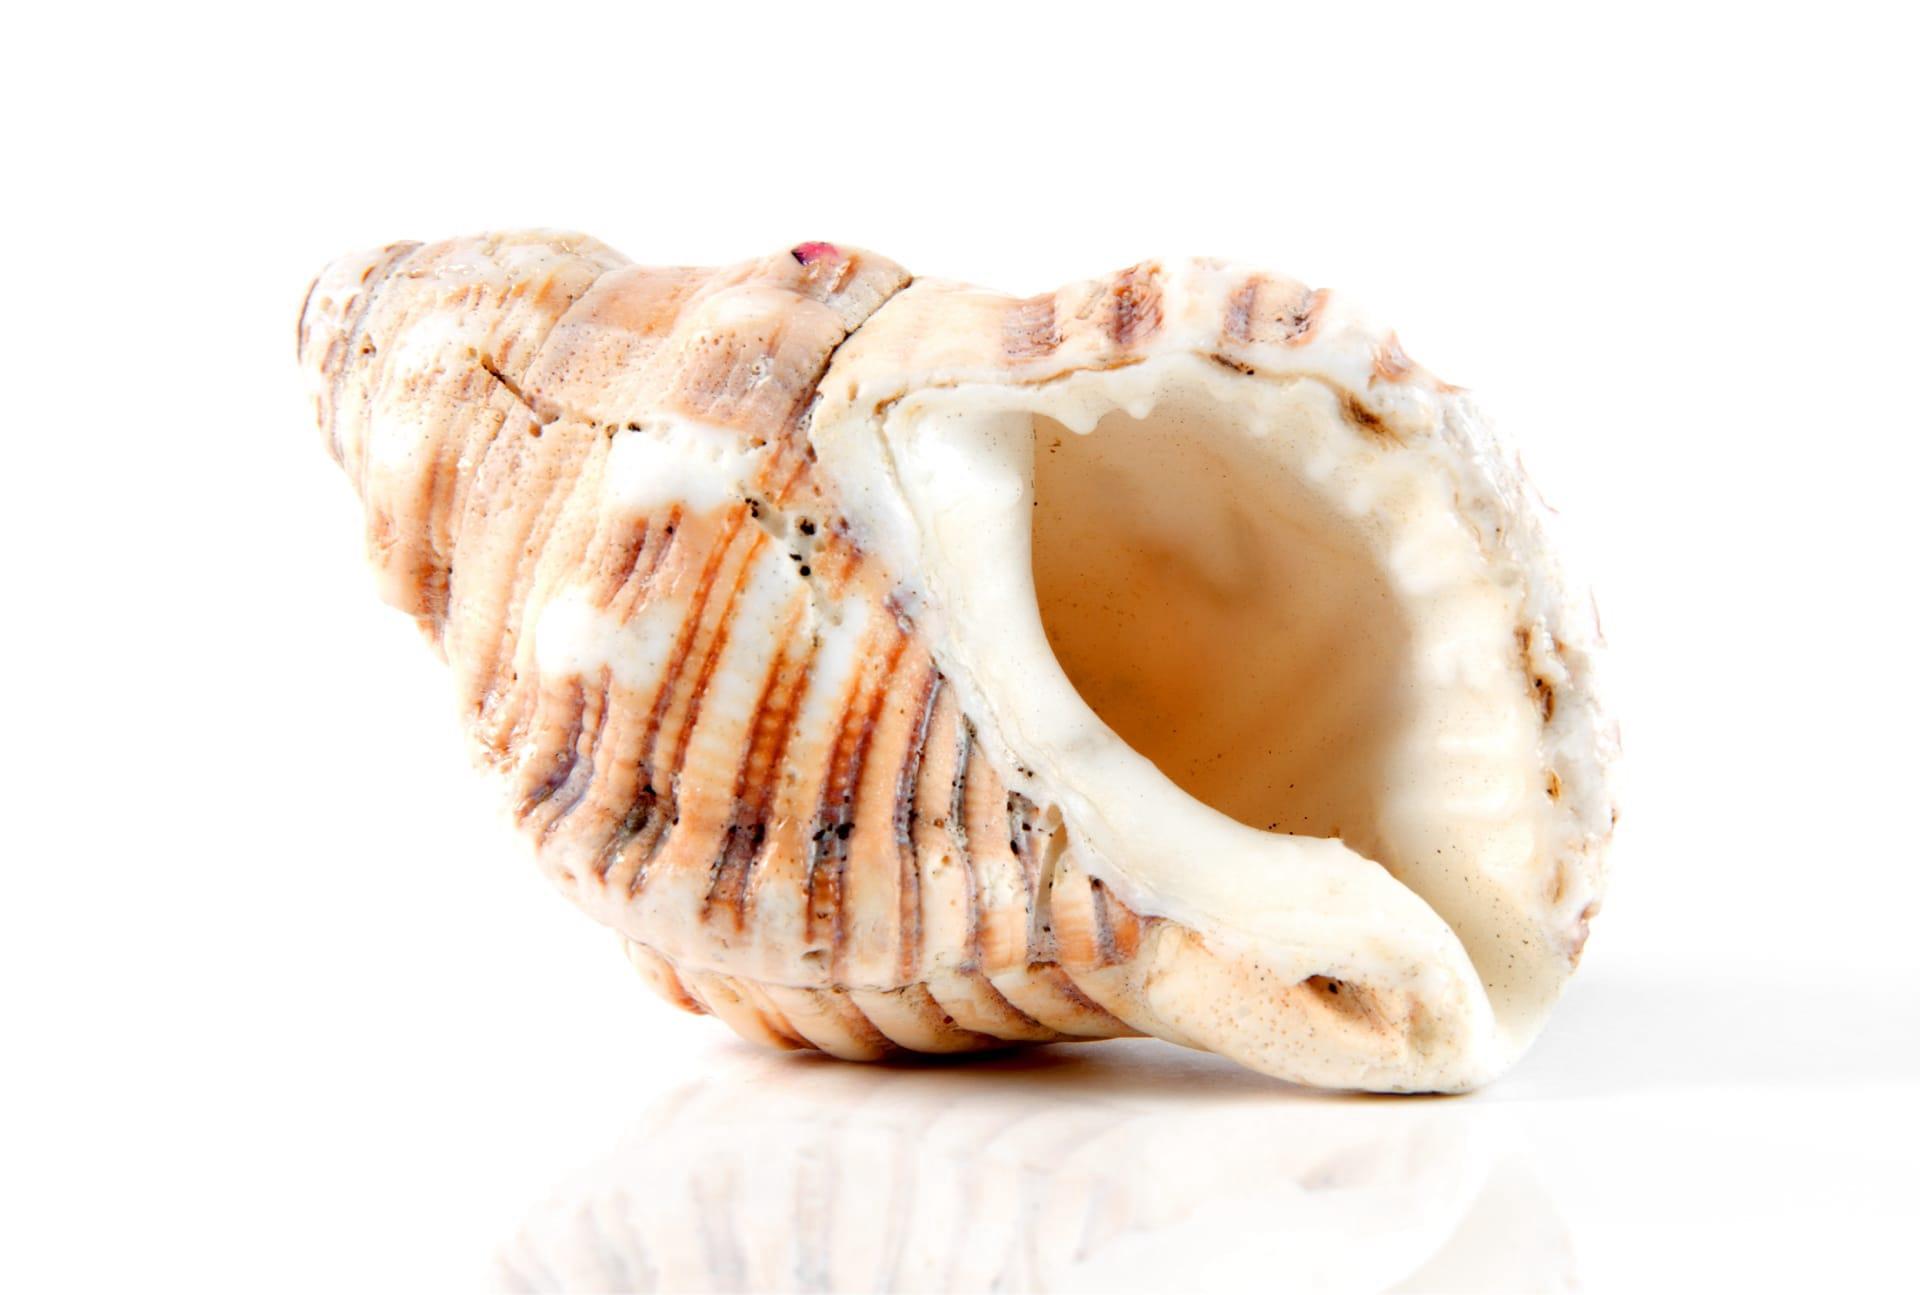 Conch pictures